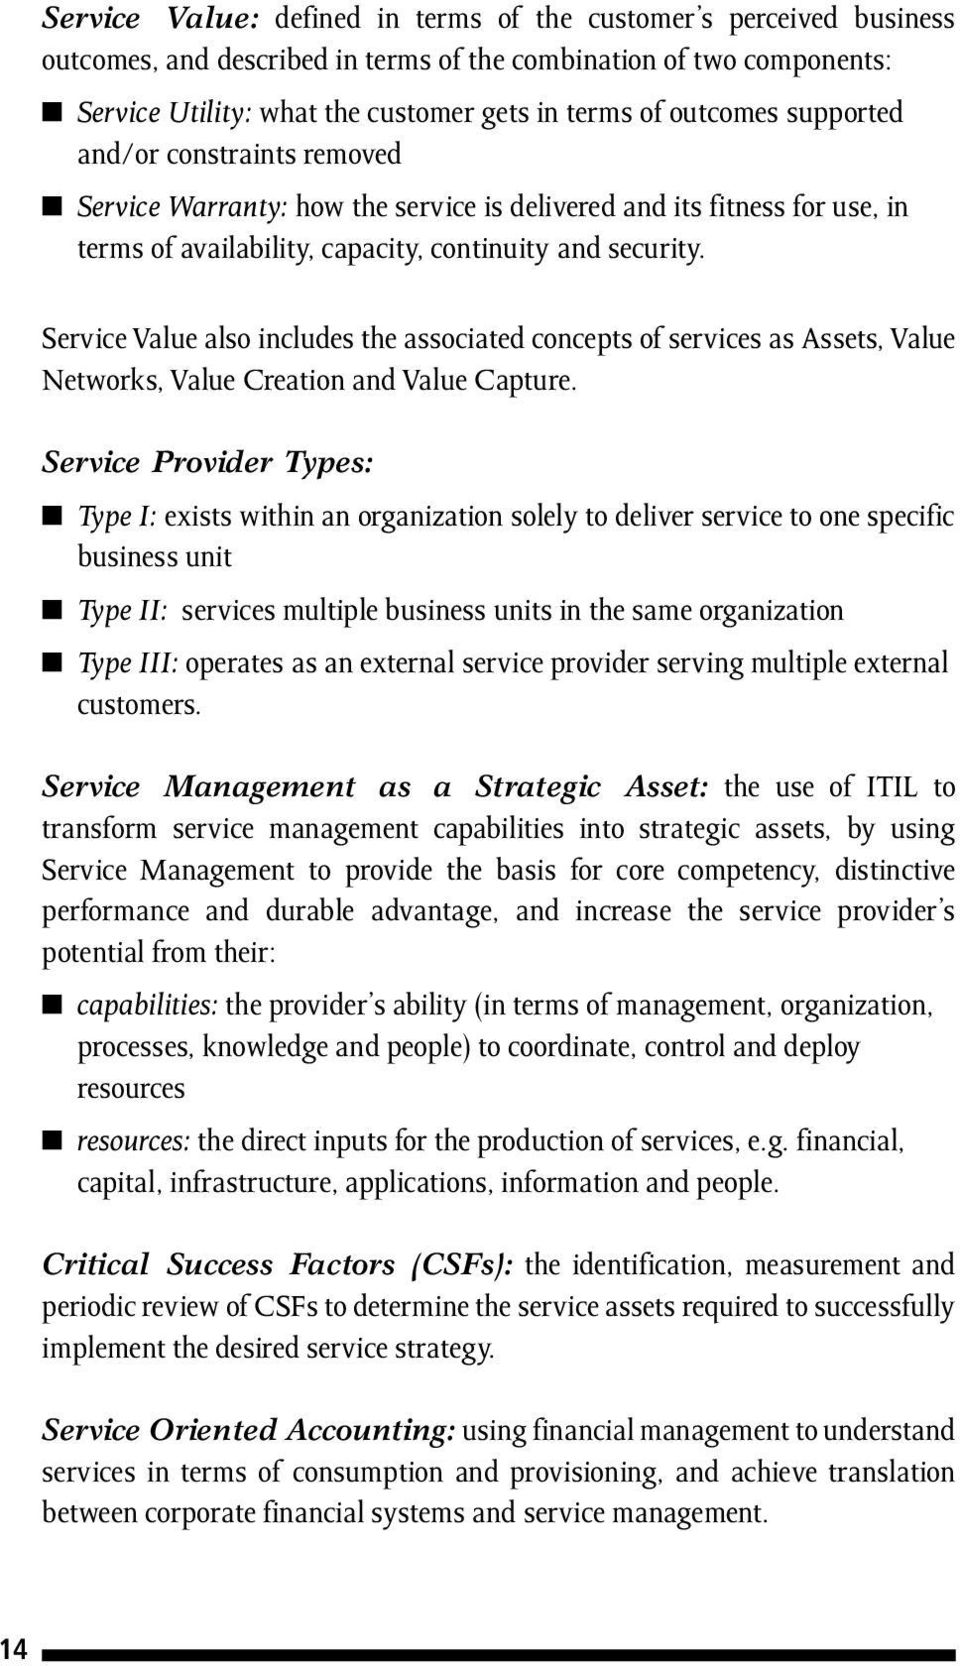 Service Value also includes the associated concepts of services as Assets, Value Networks, Value Creation and Value Capture.